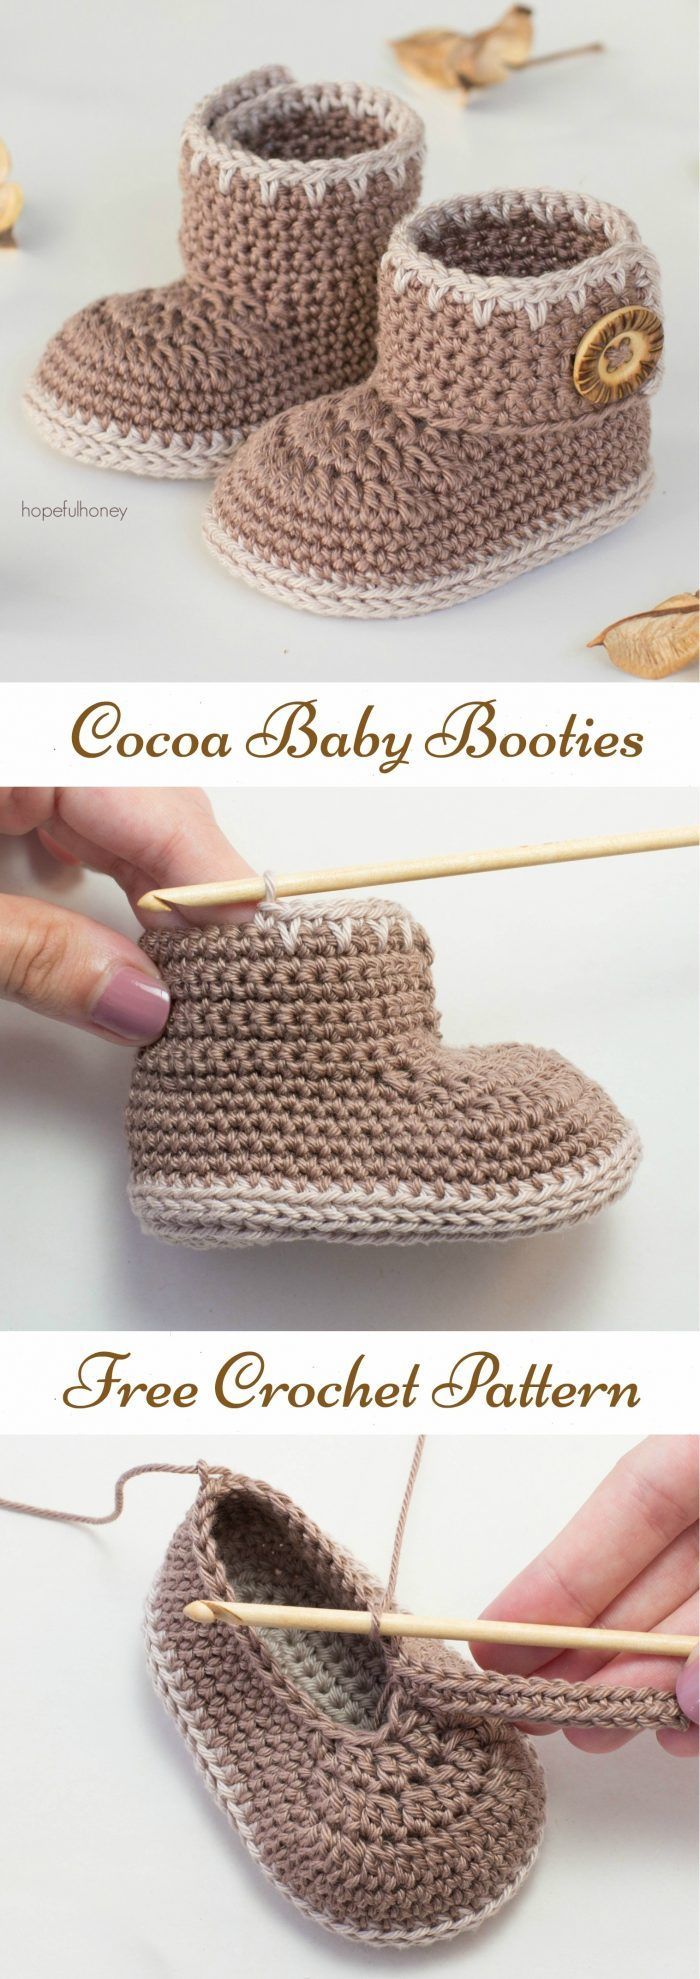 Cocoa-Baby-Booties-Free-Crochet-Pattern-Crochet-and-Knitting.jpg